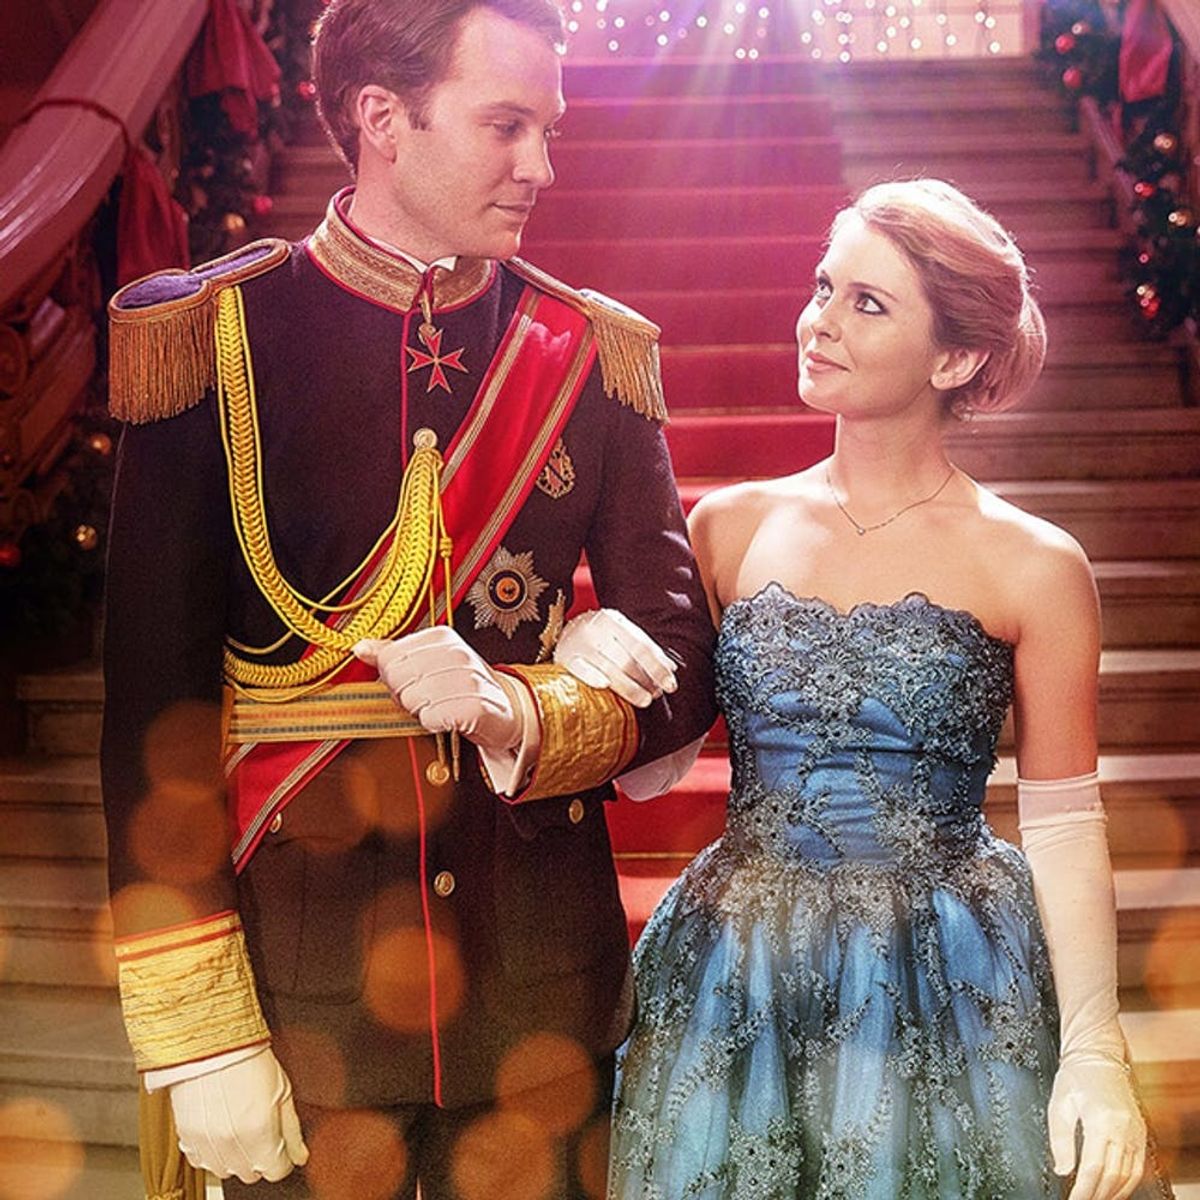 25 Thoughts I Had While Watching Netflix’s ‘A Christmas Prince’ for the First Time